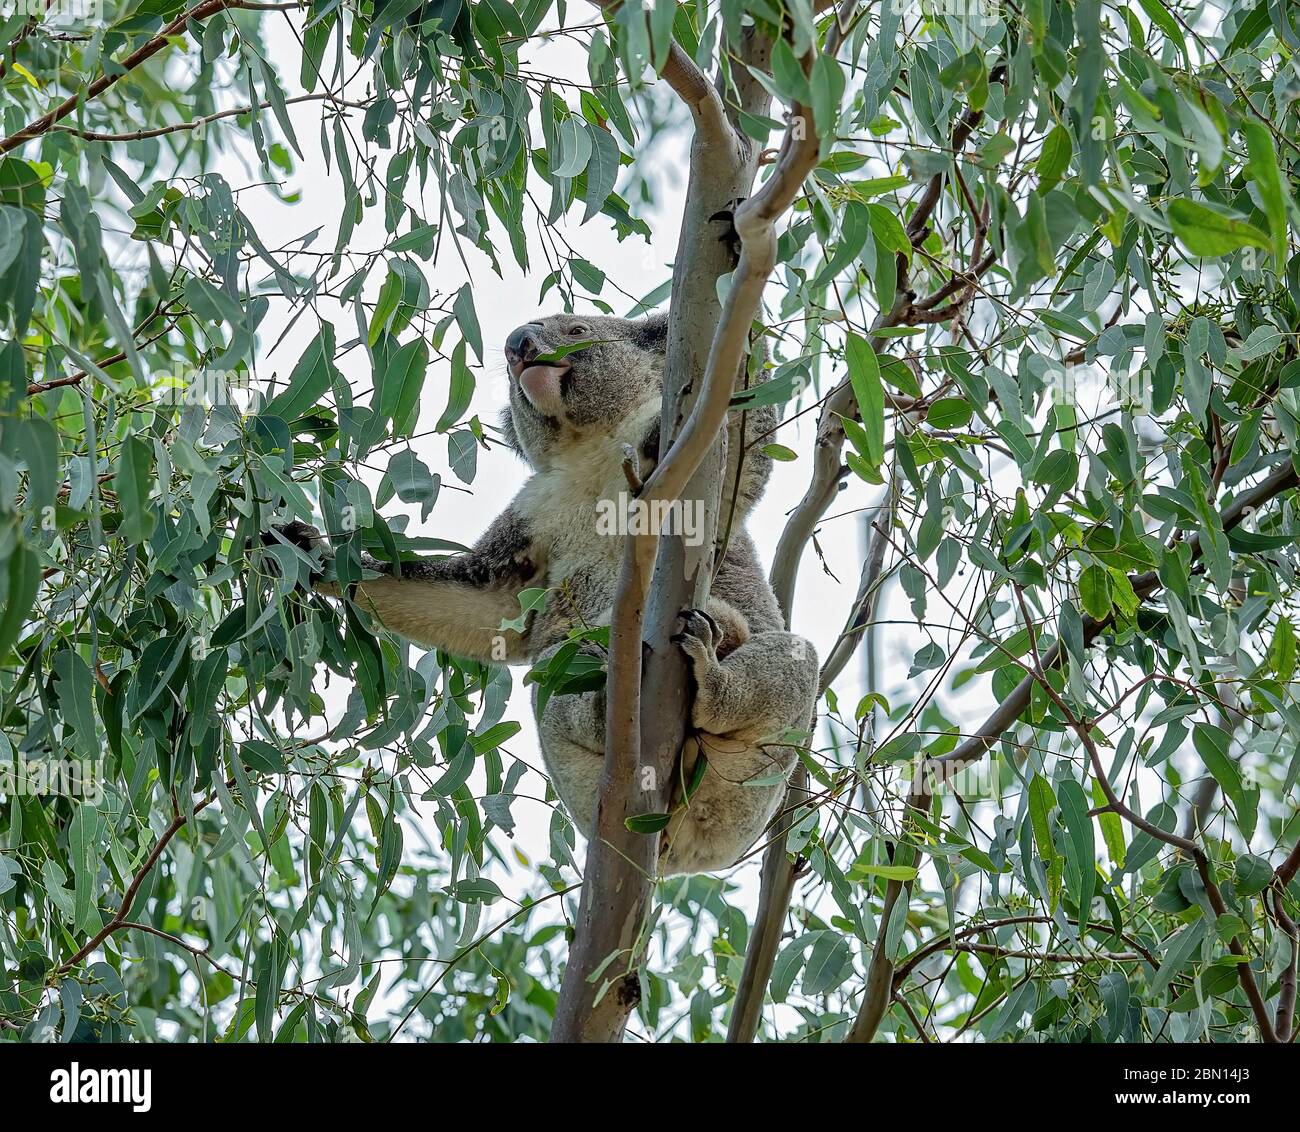 A female Australian koala with a joey in her perch reaching for eucalyptus leaves to feed on Stock Photo